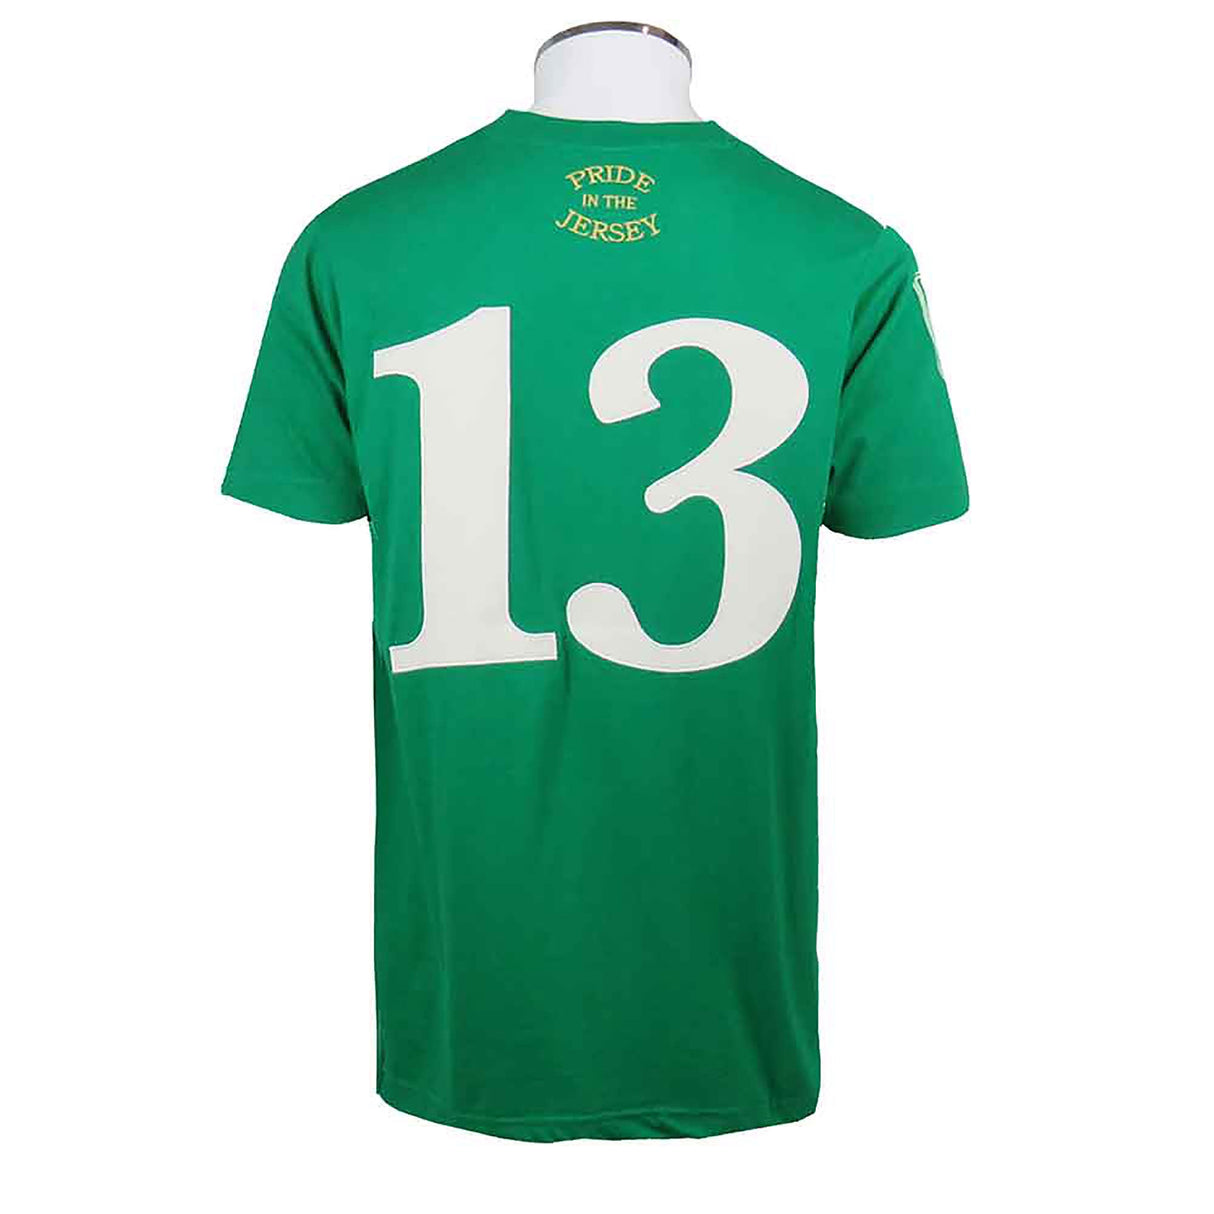 Vintage Irish Rugby T-Shirt Retro Style |T-Shirt | Ellis Rugby | Absolute Rugby